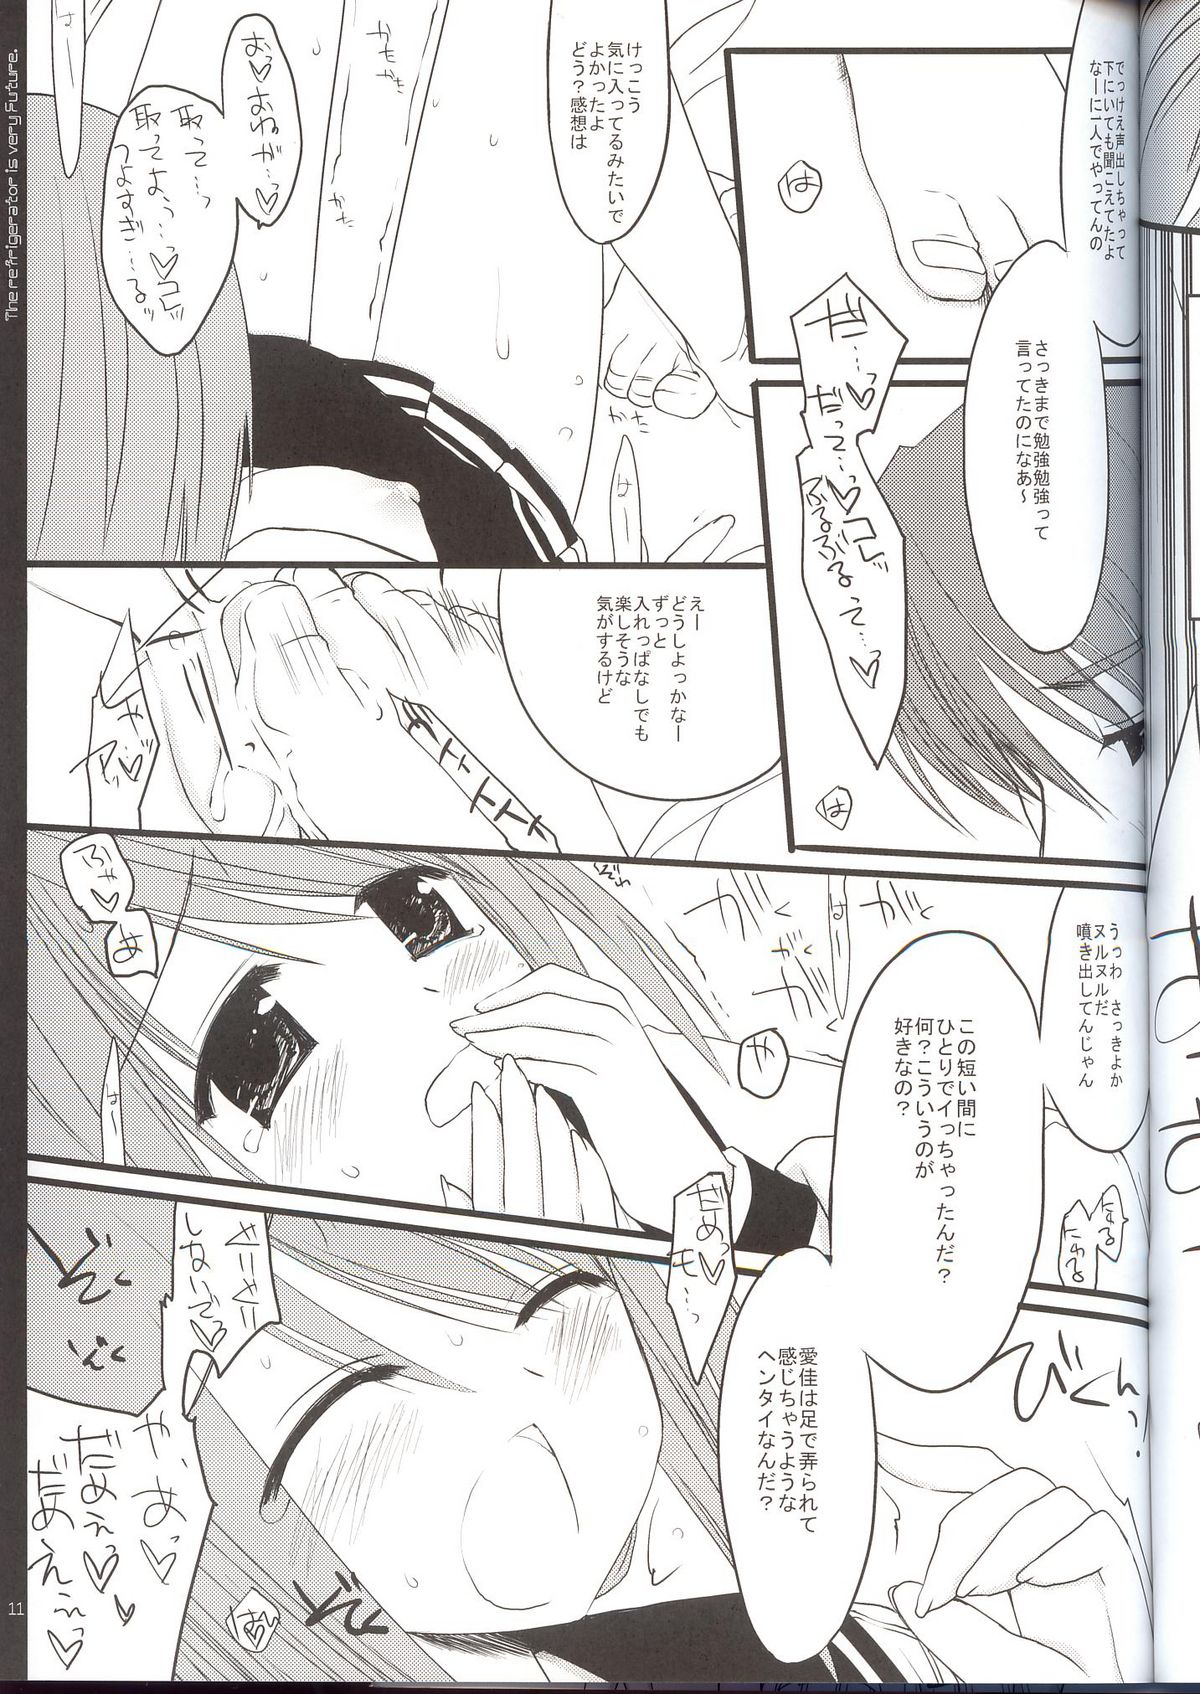 (C69) [D.N.A.Lab. (Miyasu Risa)] Reizoukotte Tottemo Future ‐ The Refrigerator is very Future (ToHeart 2) page 10 full